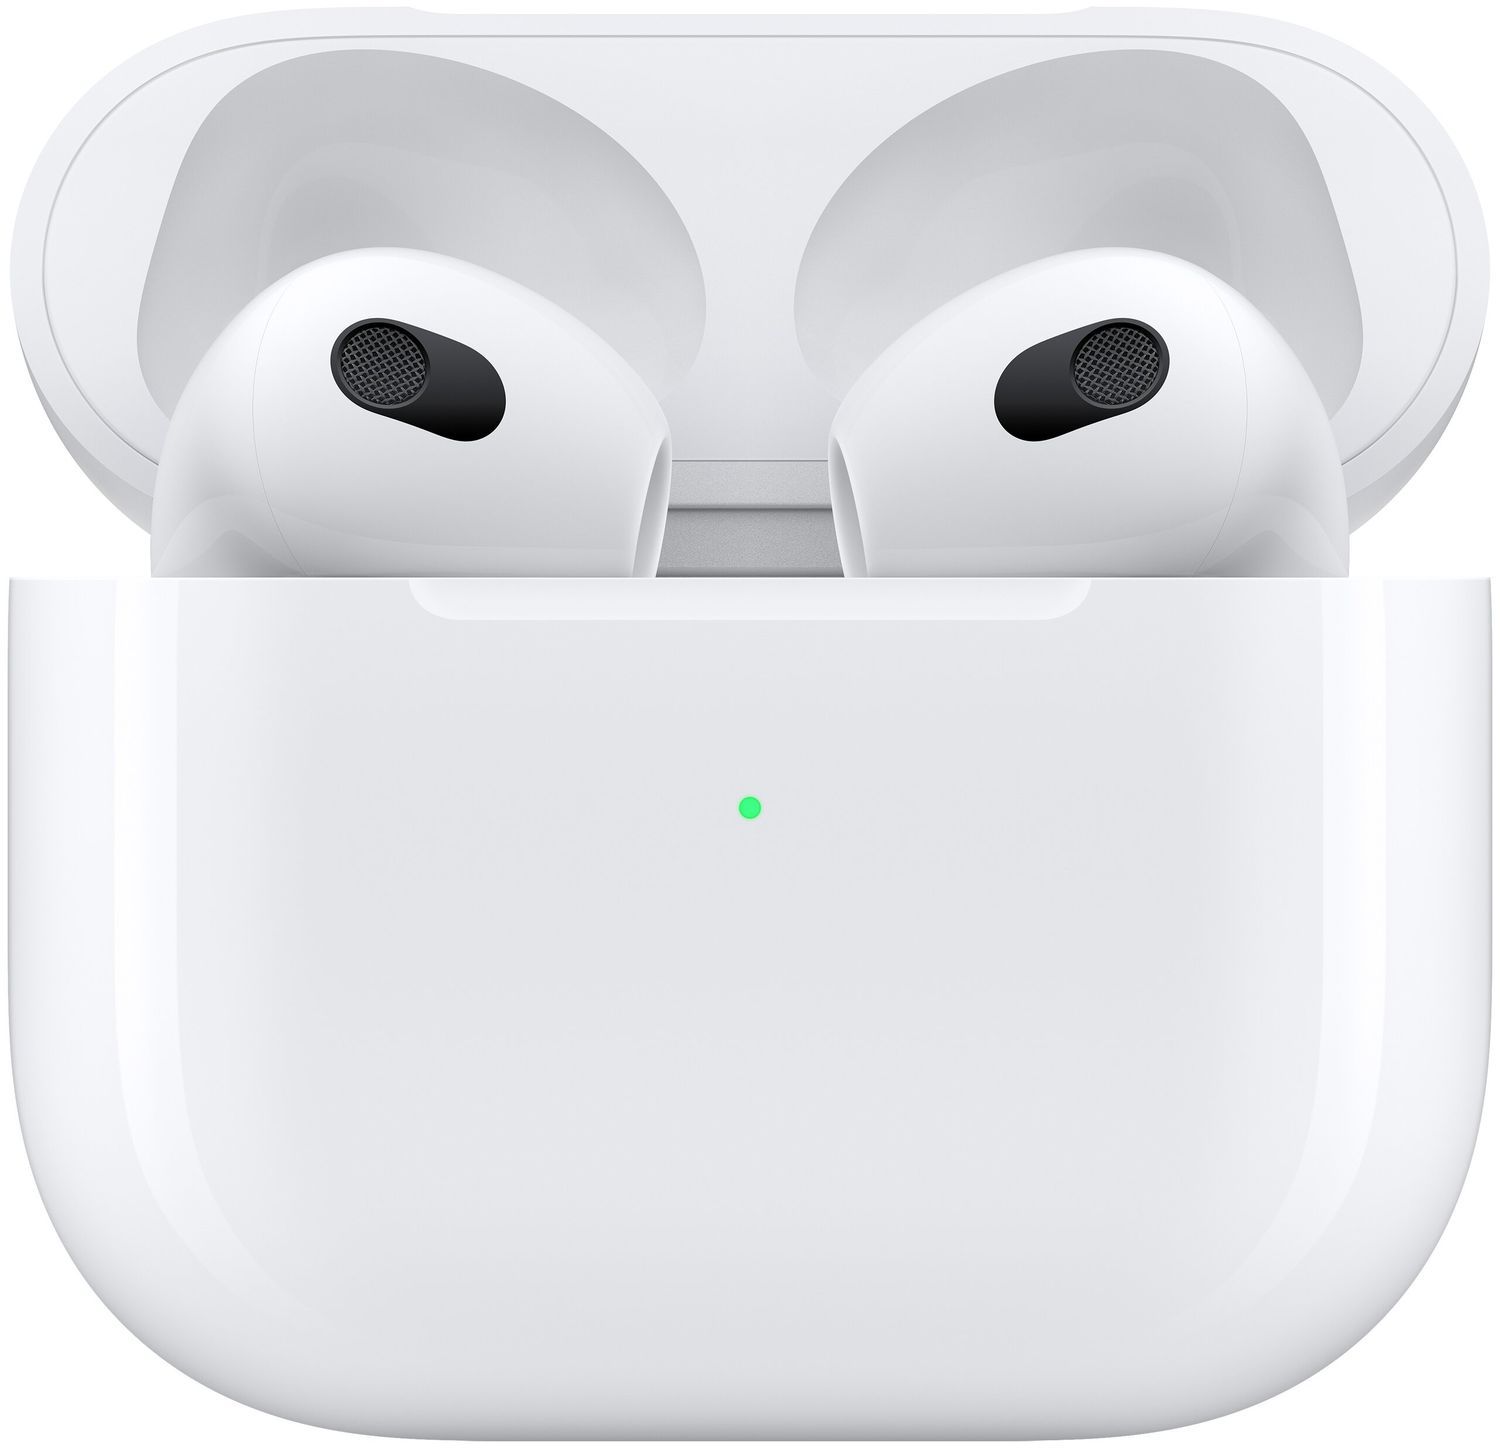 Наушники Apple AirPods 3 MagSafe Charging Case, белый MME73 беспроводные наушники apple airpods 3 magsafe charging case mme73